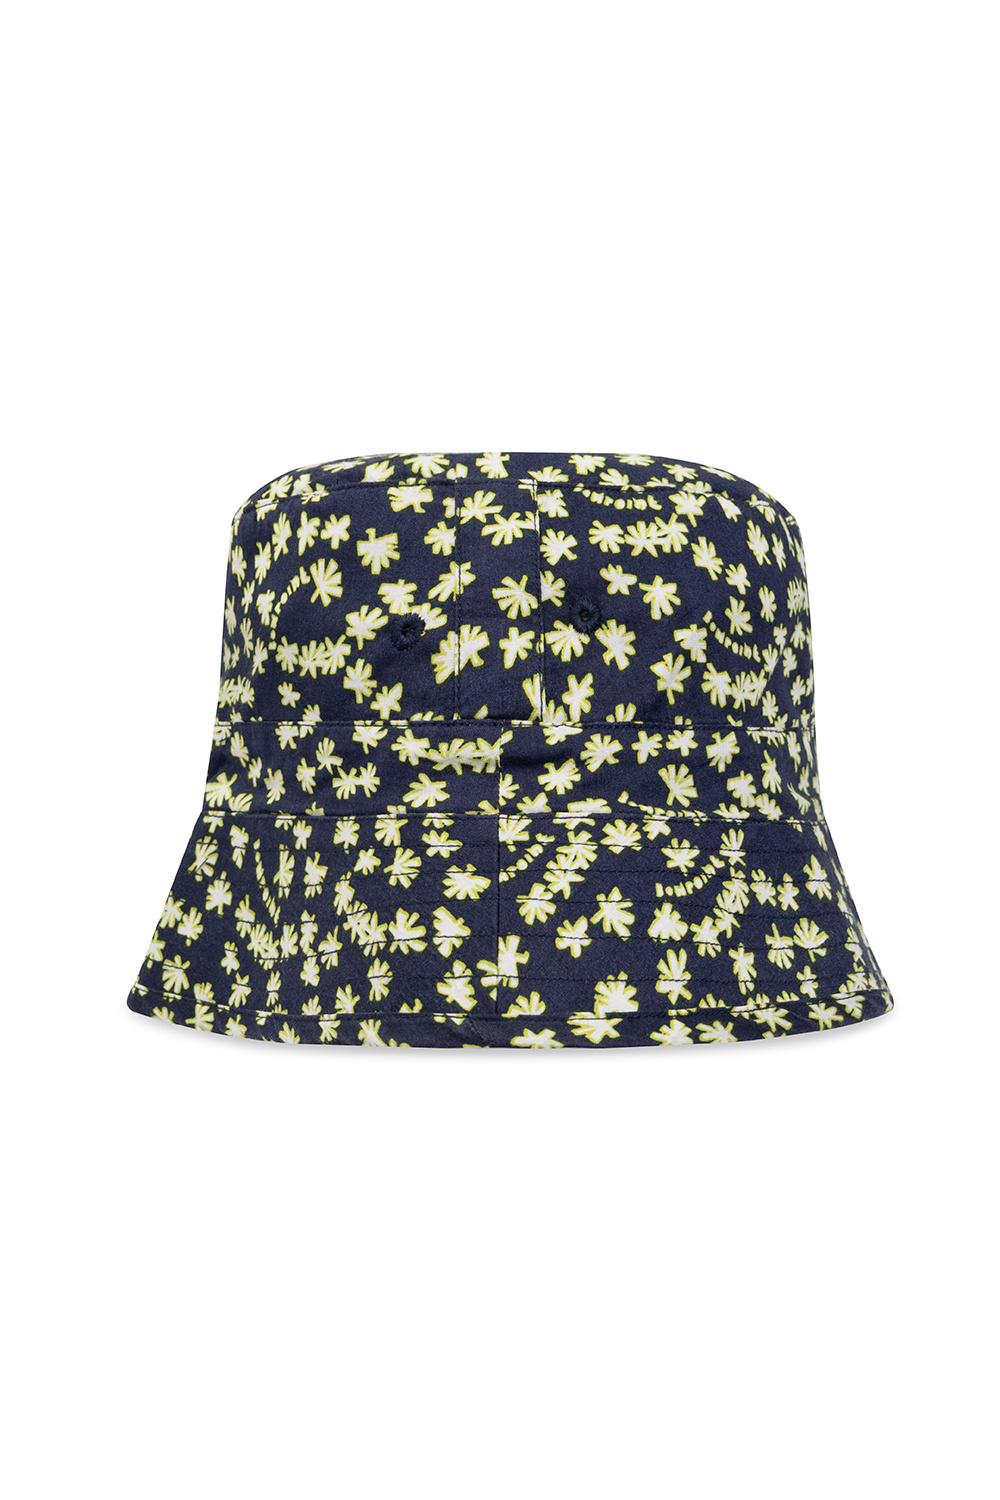 Bonpoint  Bucket hat with floral VN0A47S8BLK1